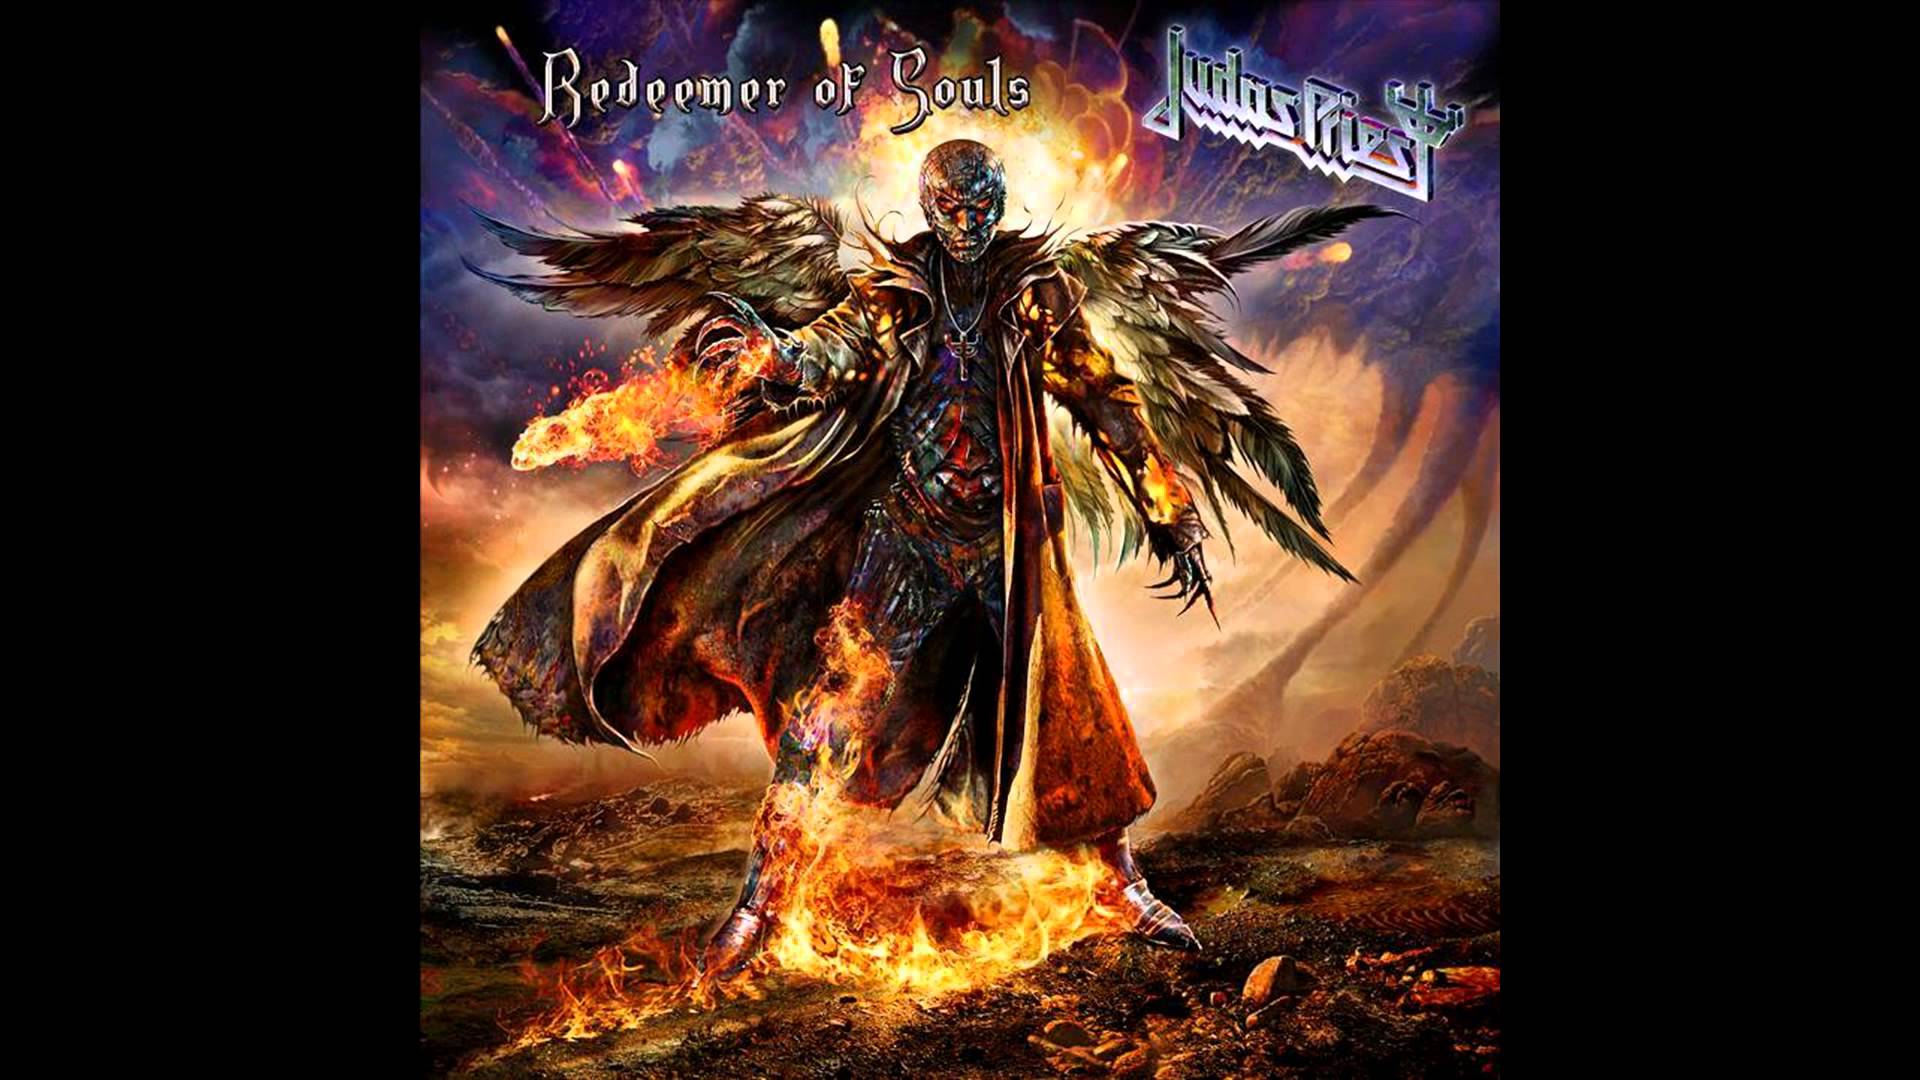 Judas Priest - Redeemer Of Souls 2014 (Official) - YouTube